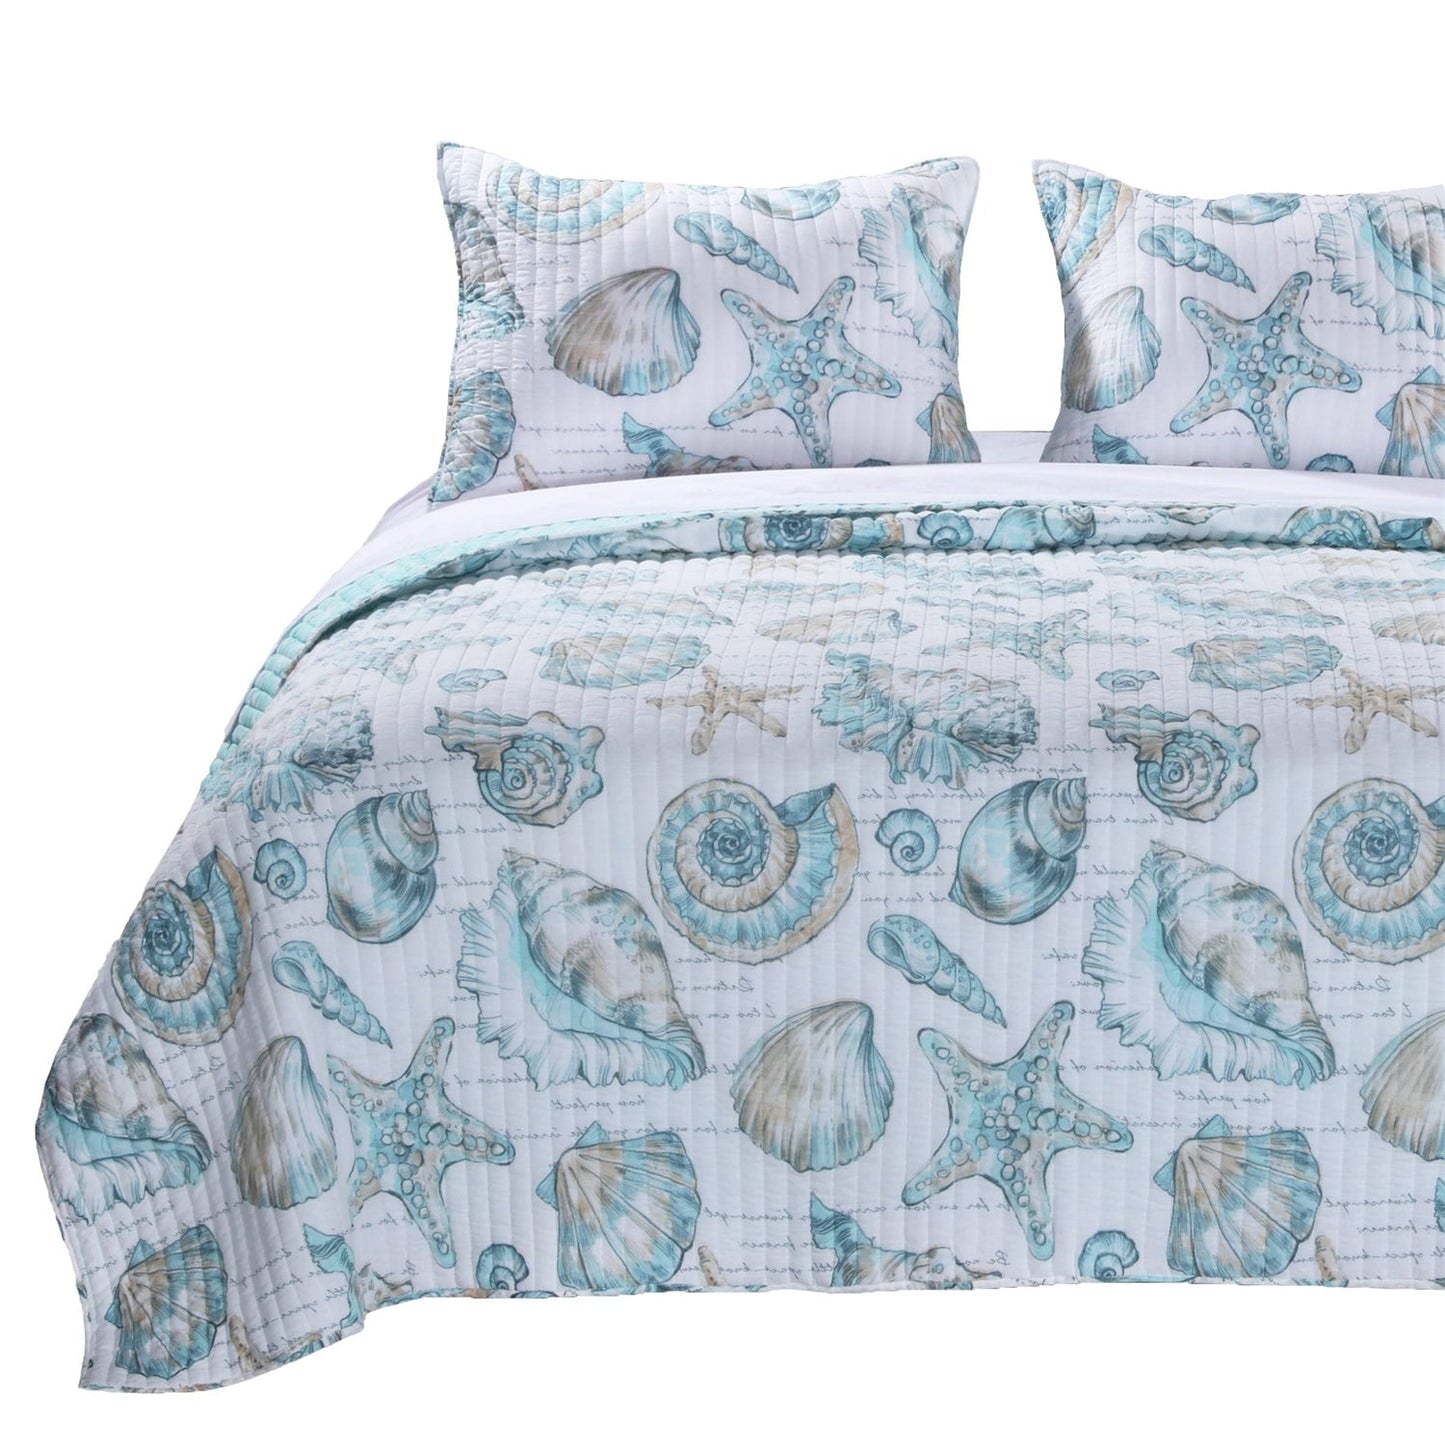 Bedroom > Quilts & Blankets - Twin Coastal Seashells White Teal 2 Piece Polyester Reversible Quilt Set